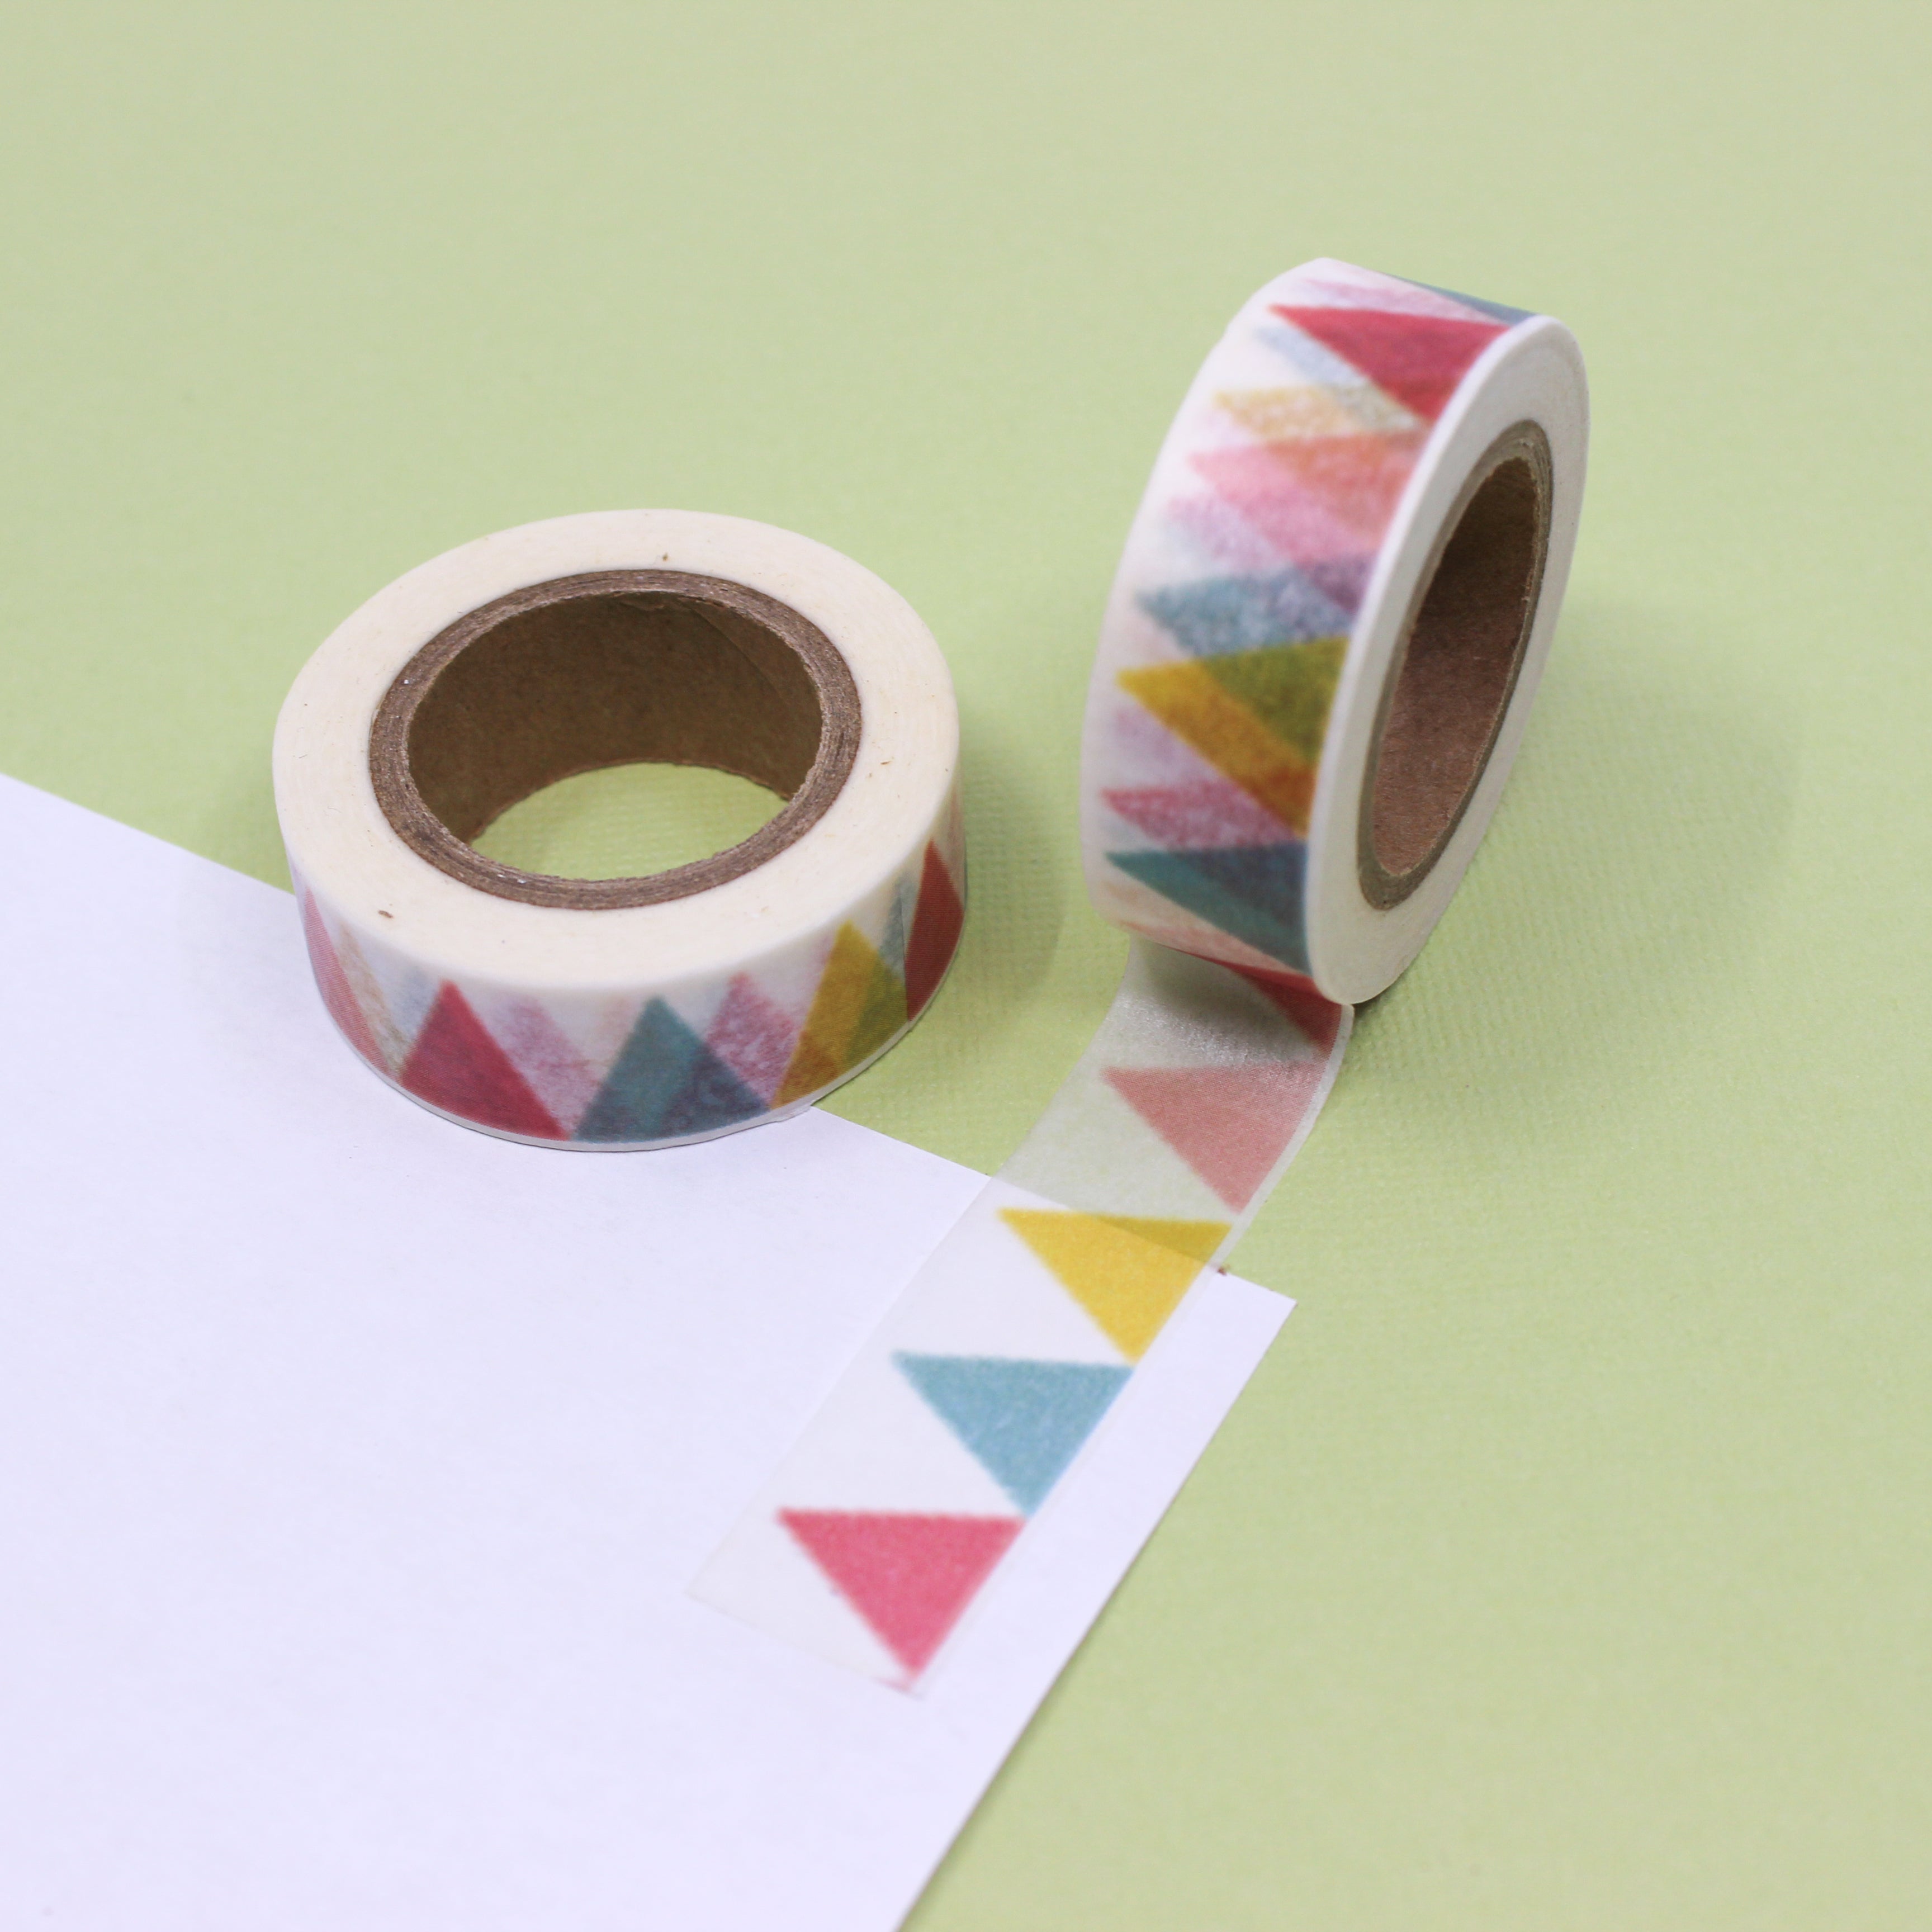 This is a multi color triangle washi tape from BBB Supplies Craft Shop